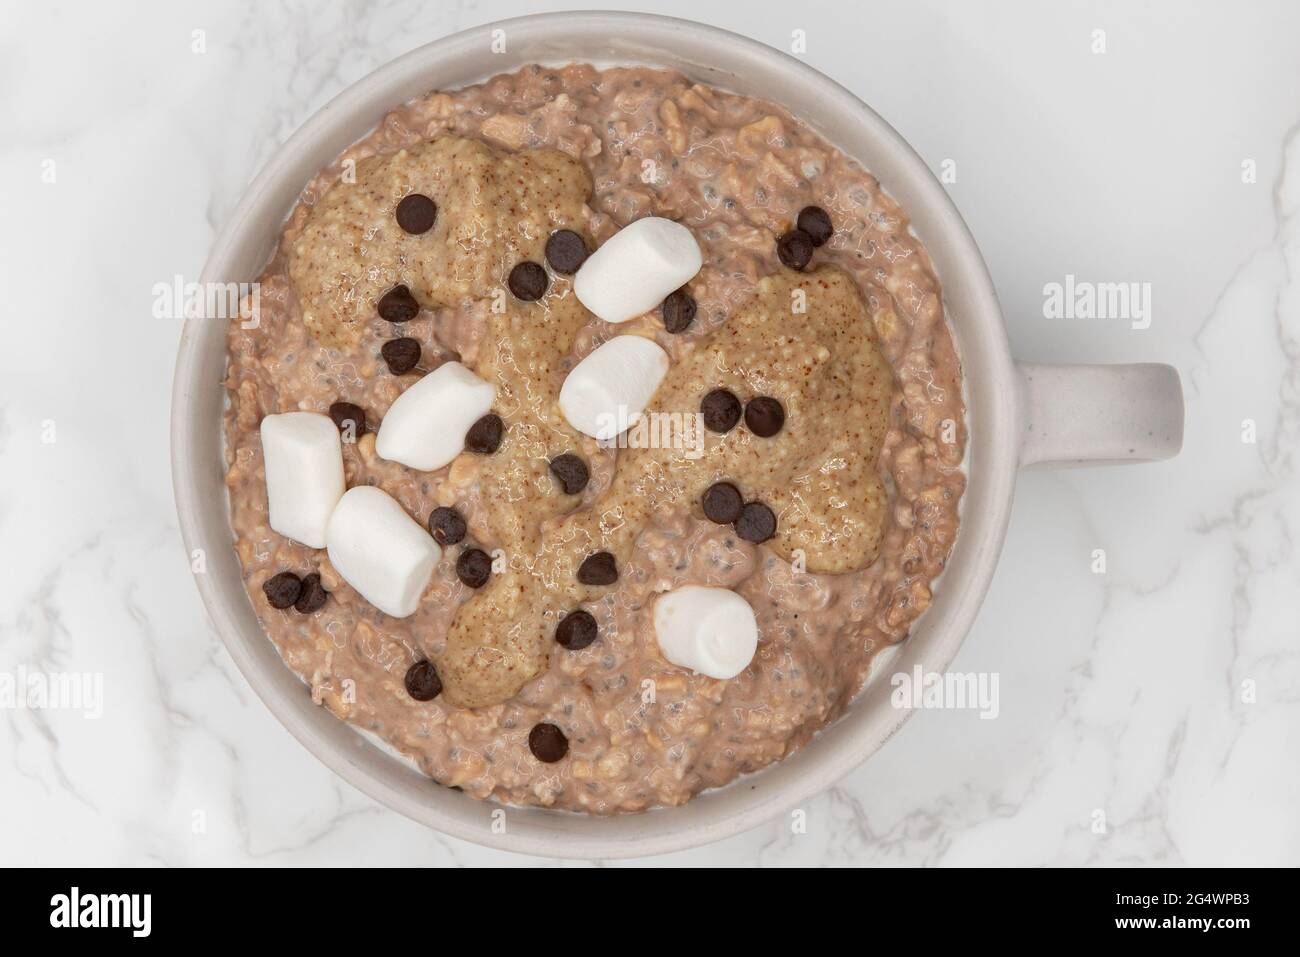 Marshmellows and chocolate chips on top of oatmeal ready to eat in a bowl on the table is a great way to start the day with a good source of fiber and Stock Photo